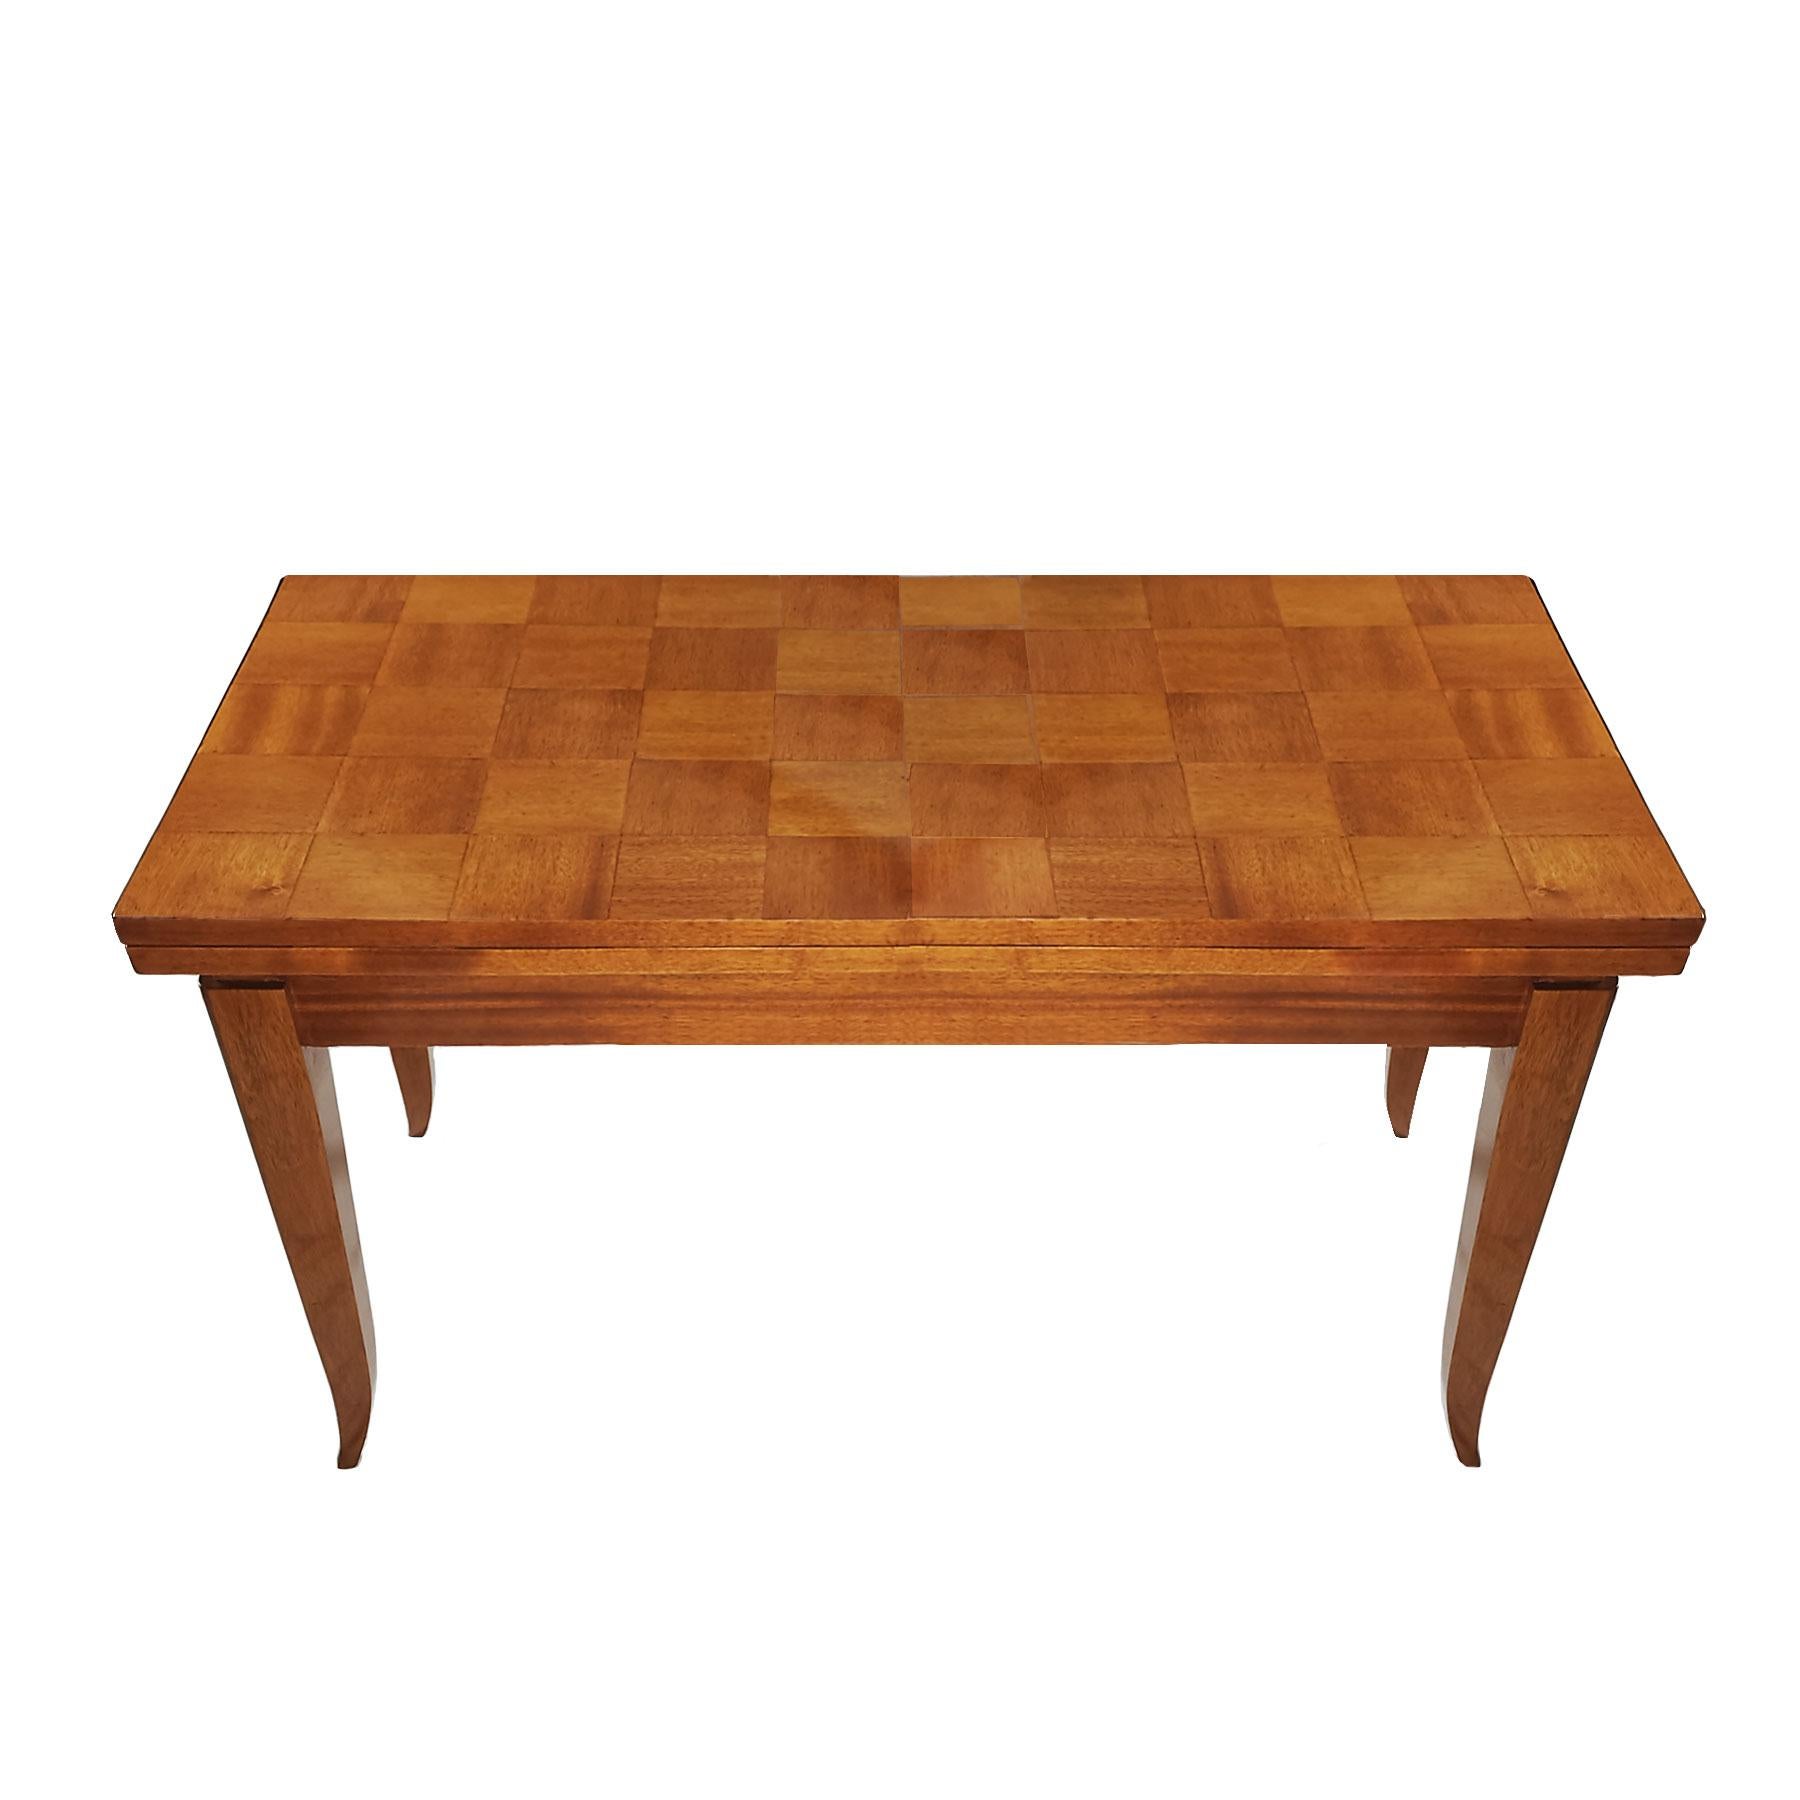 Mid-20th Century Mid-Century Modern Game Table in Light Mahogany With Double Flap Top - France For Sale